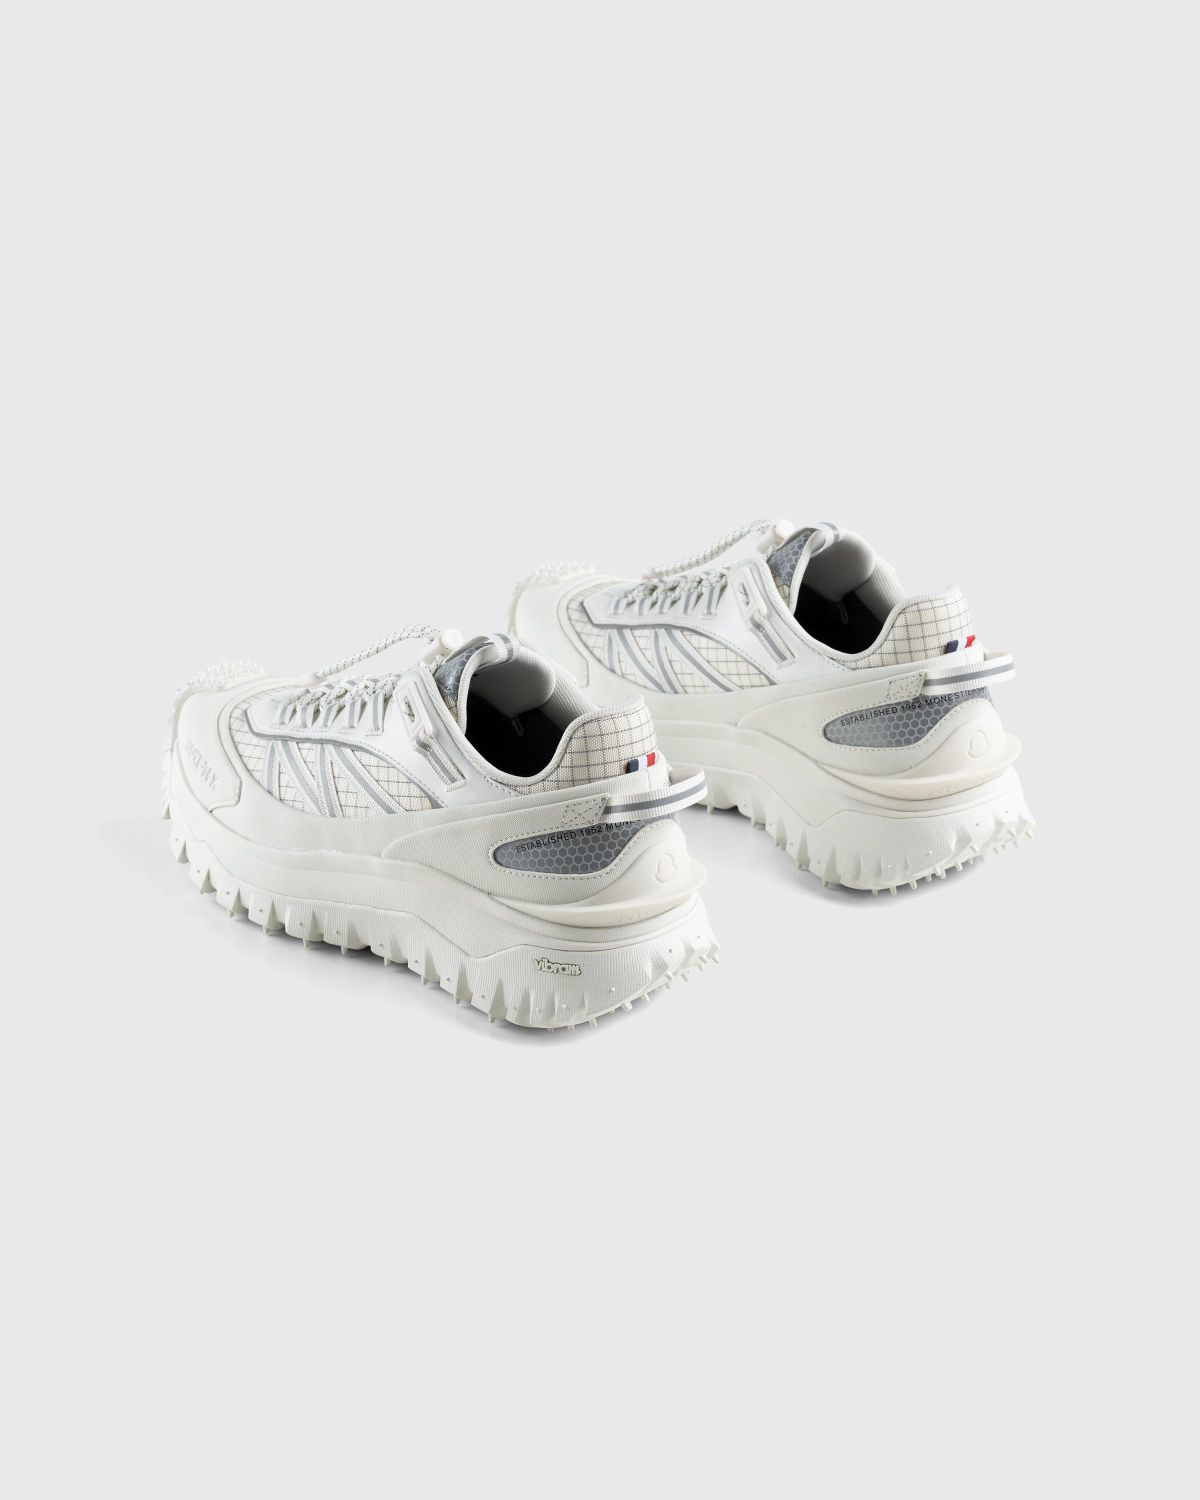 Moncler – Trailgrip GTX Sneakers Off White - Low Top Sneakers - White - Image 4